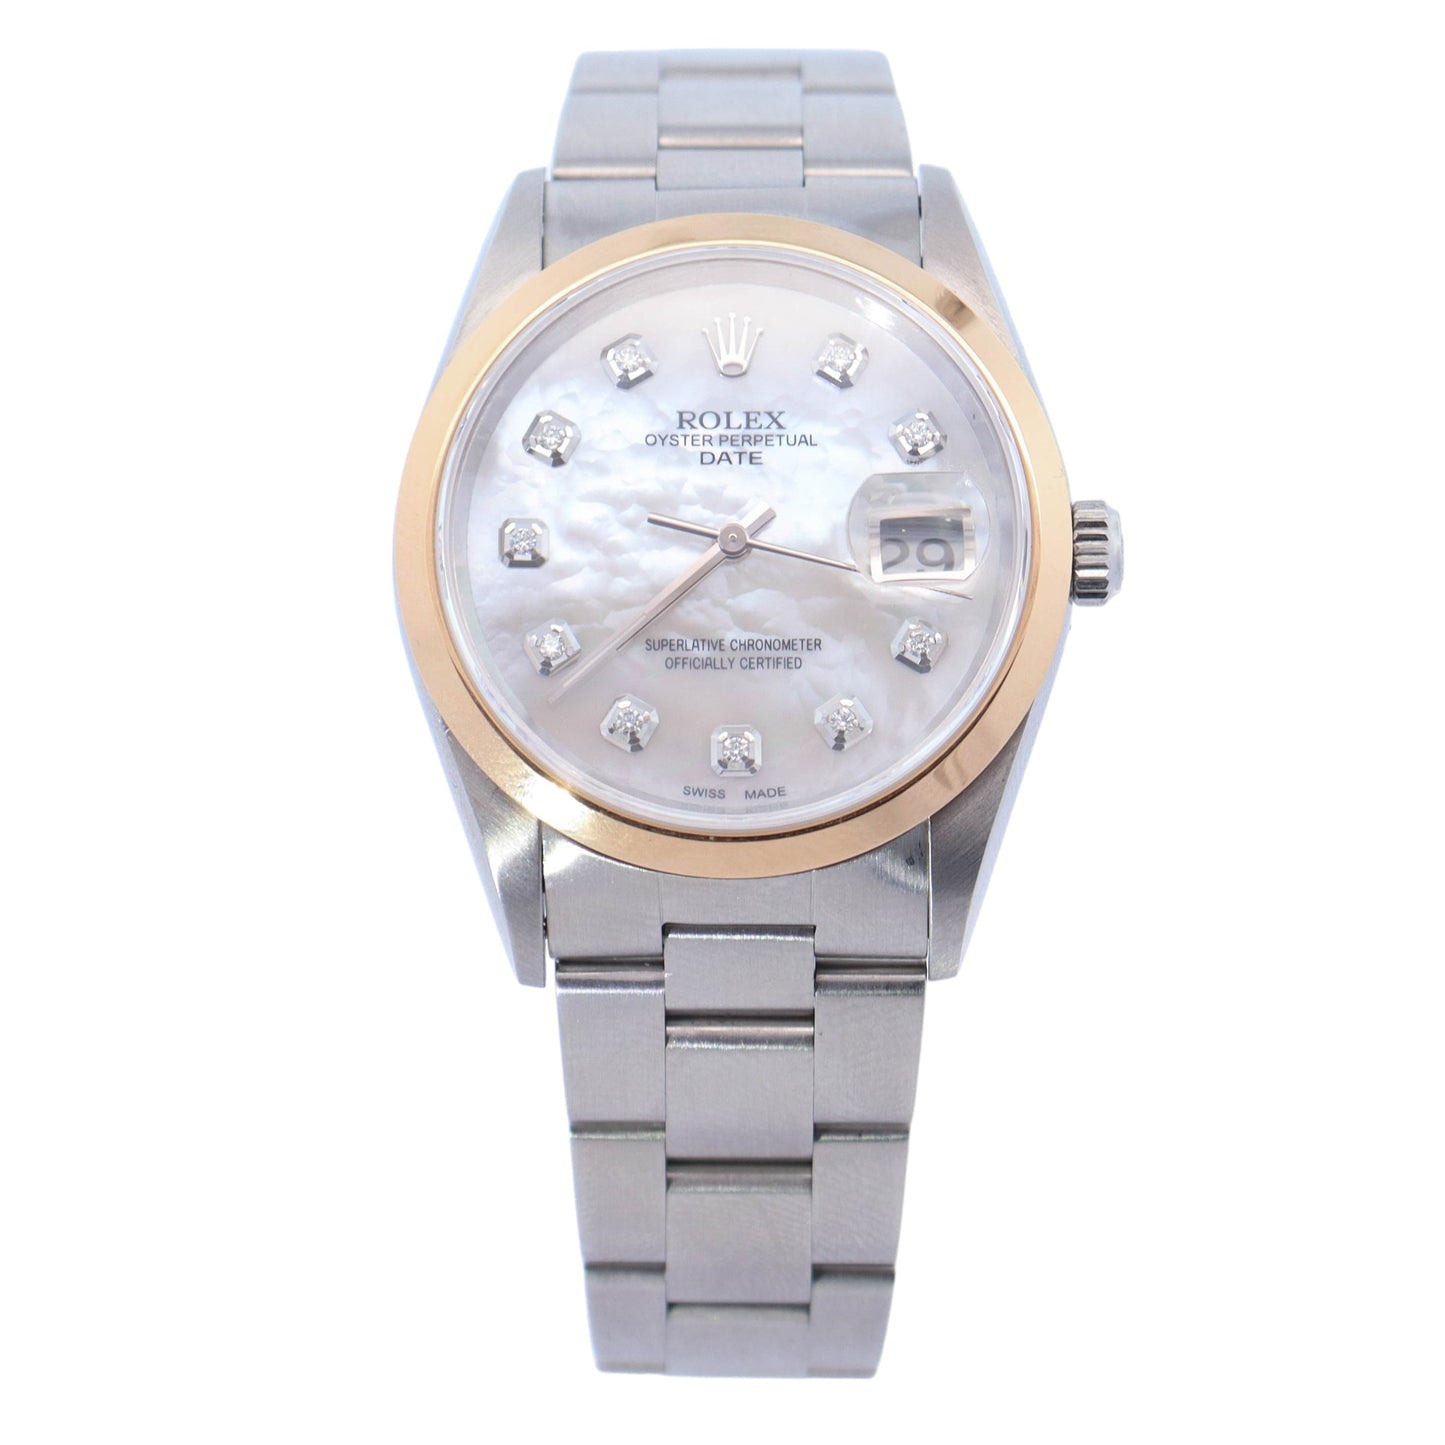 Rolex Date Stainless Steel 34mm Custom White MOP Diamond Dial Watch Reference #: 15200